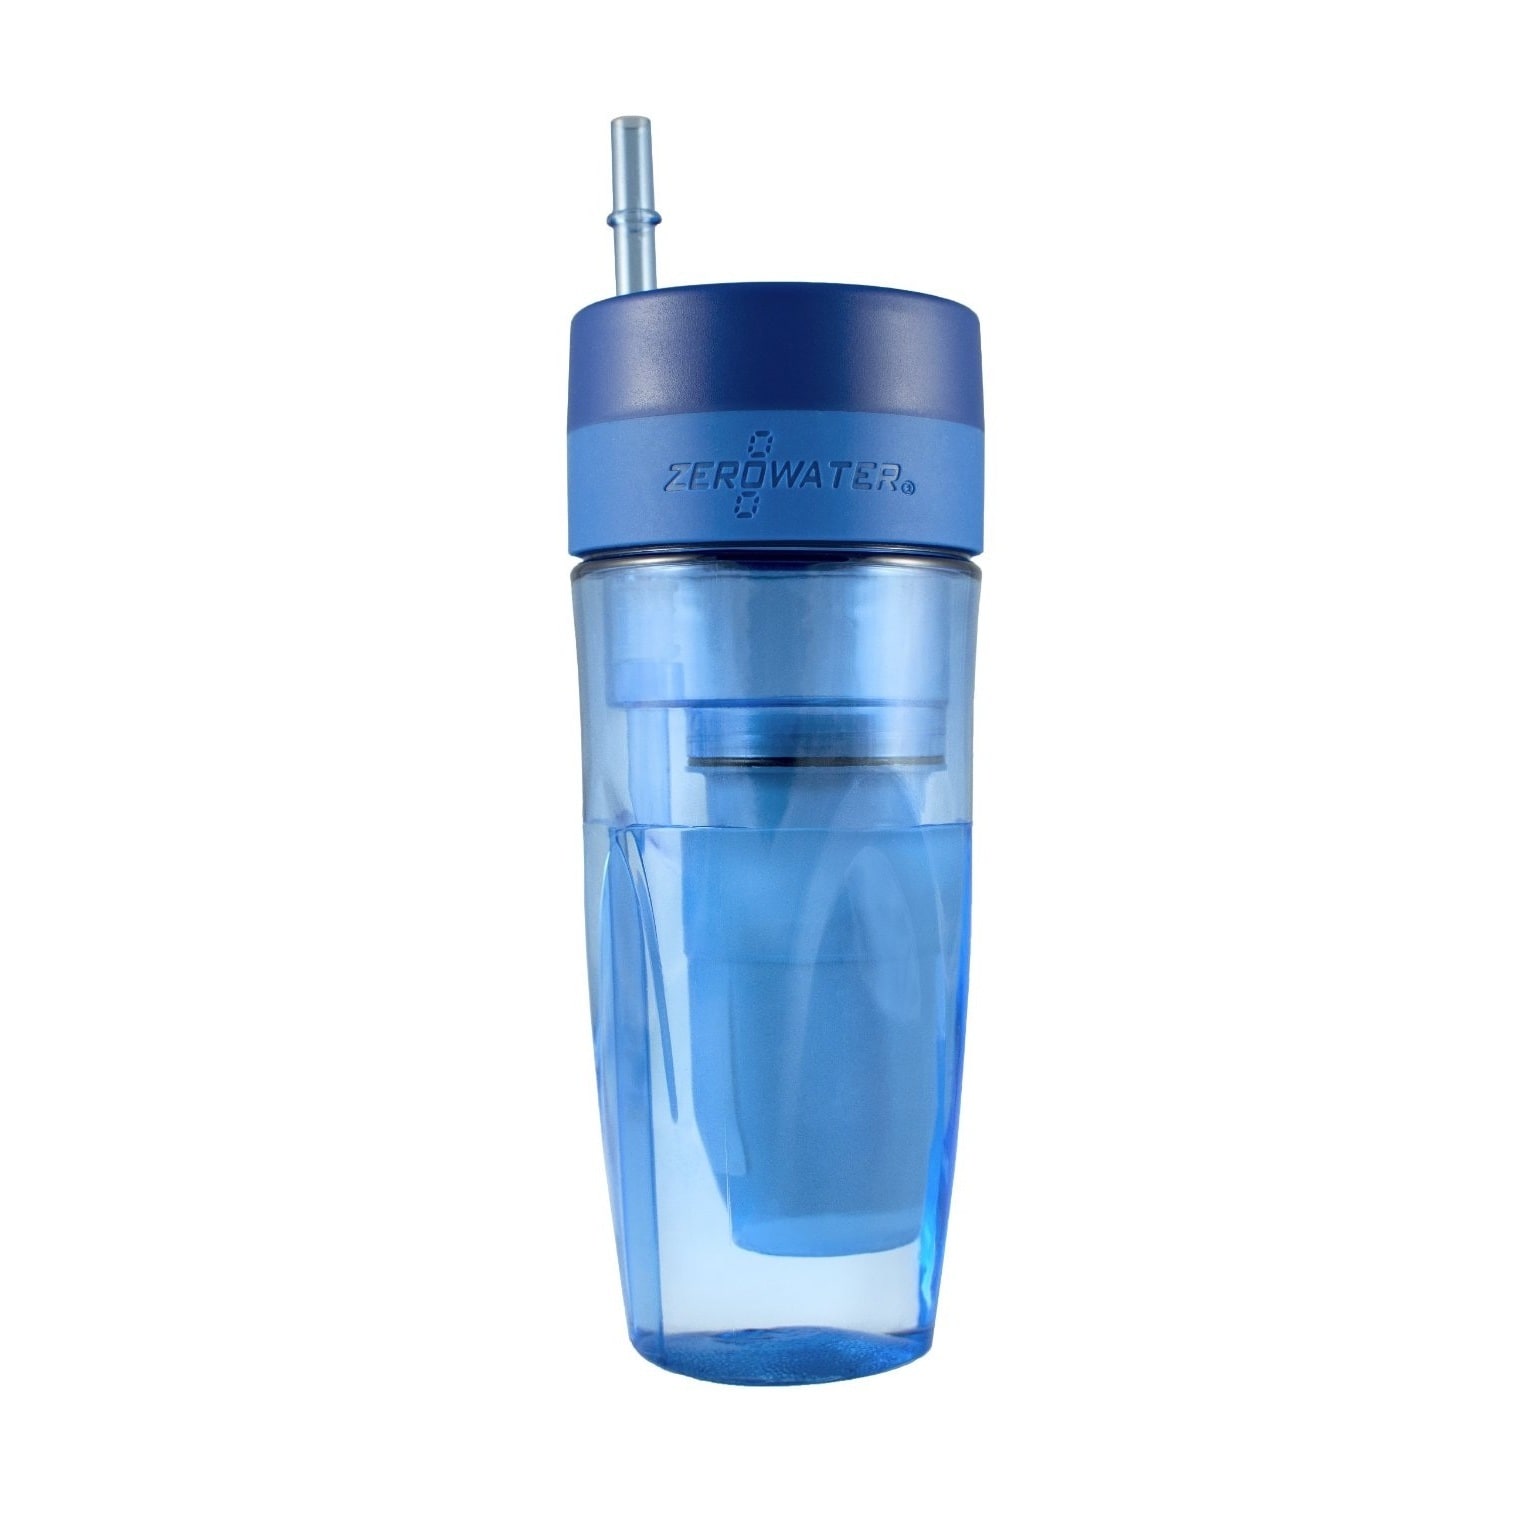 Zero Portable Water Filter - image 2 of 2